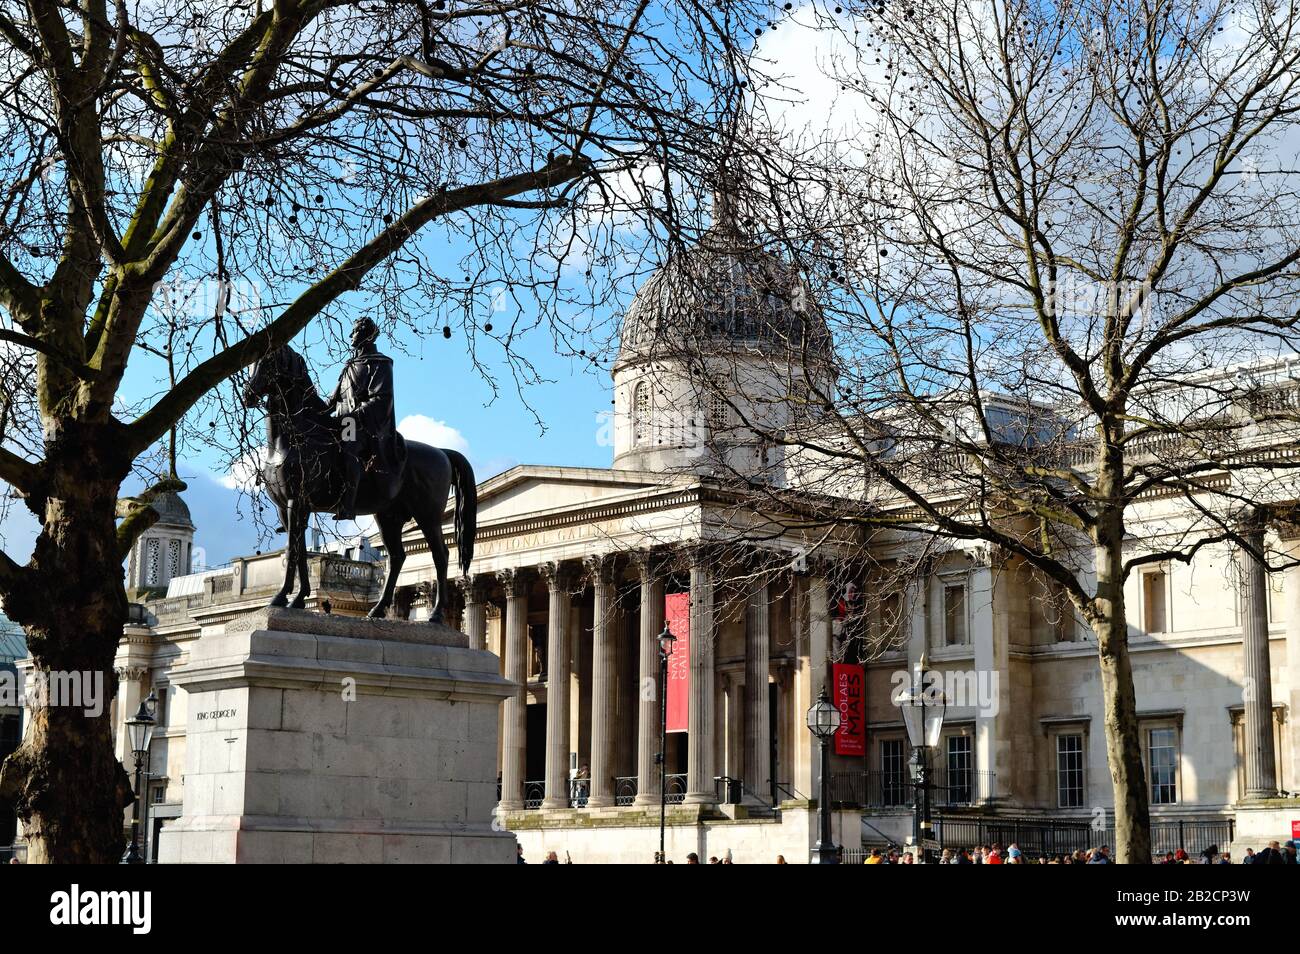 Exterior of the National Gallery, Trafalgar Square, Central London England UK Stock Photo